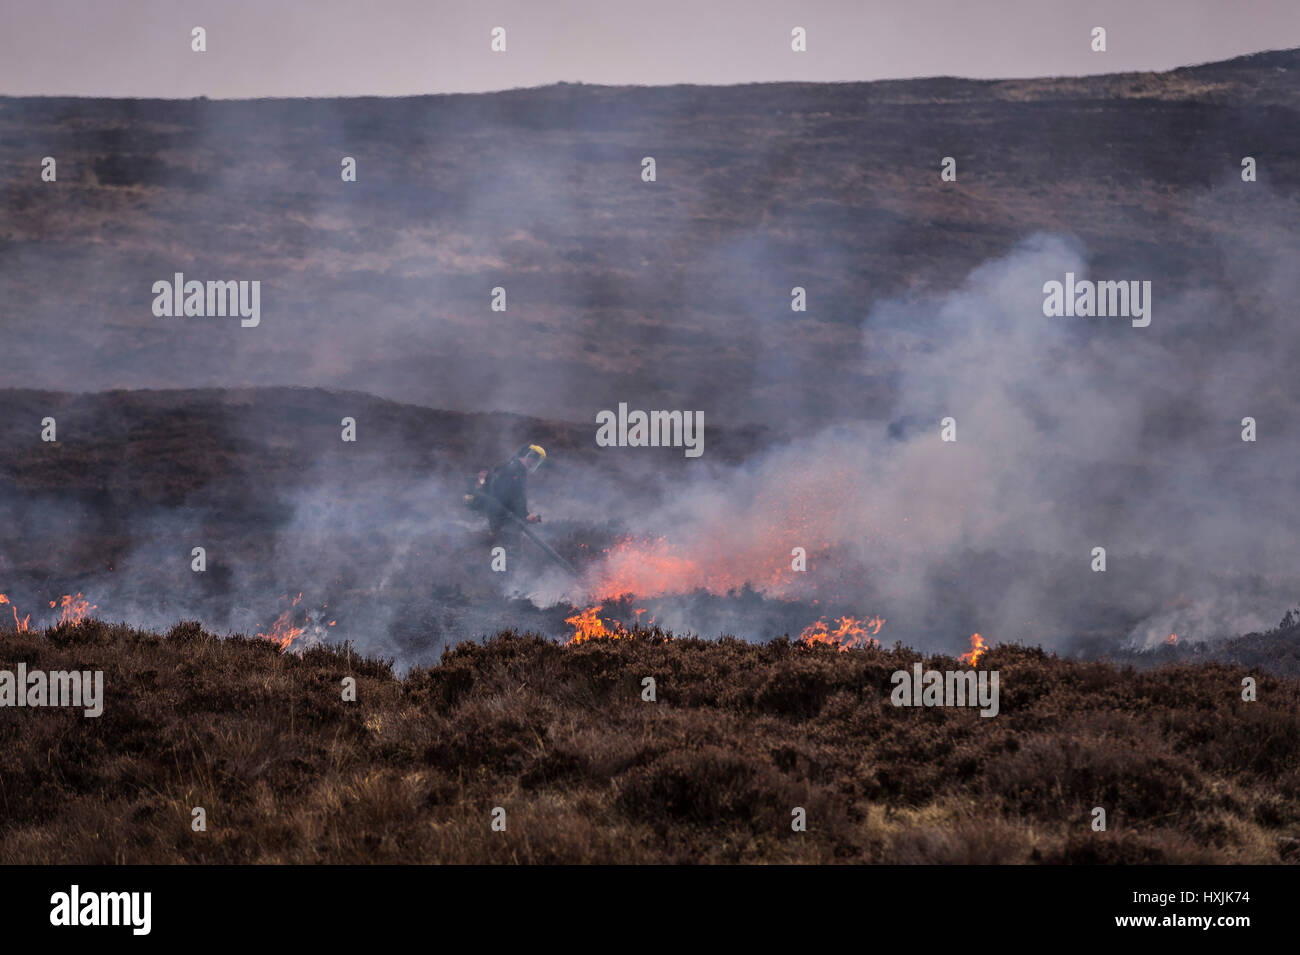 A lone worker extinguishes back fires as heather burns on a hillside during a muirburn on a heather moorland near Inverness. A muirburn is controlled heather fire and is considered an important land management practice. Stock Photo